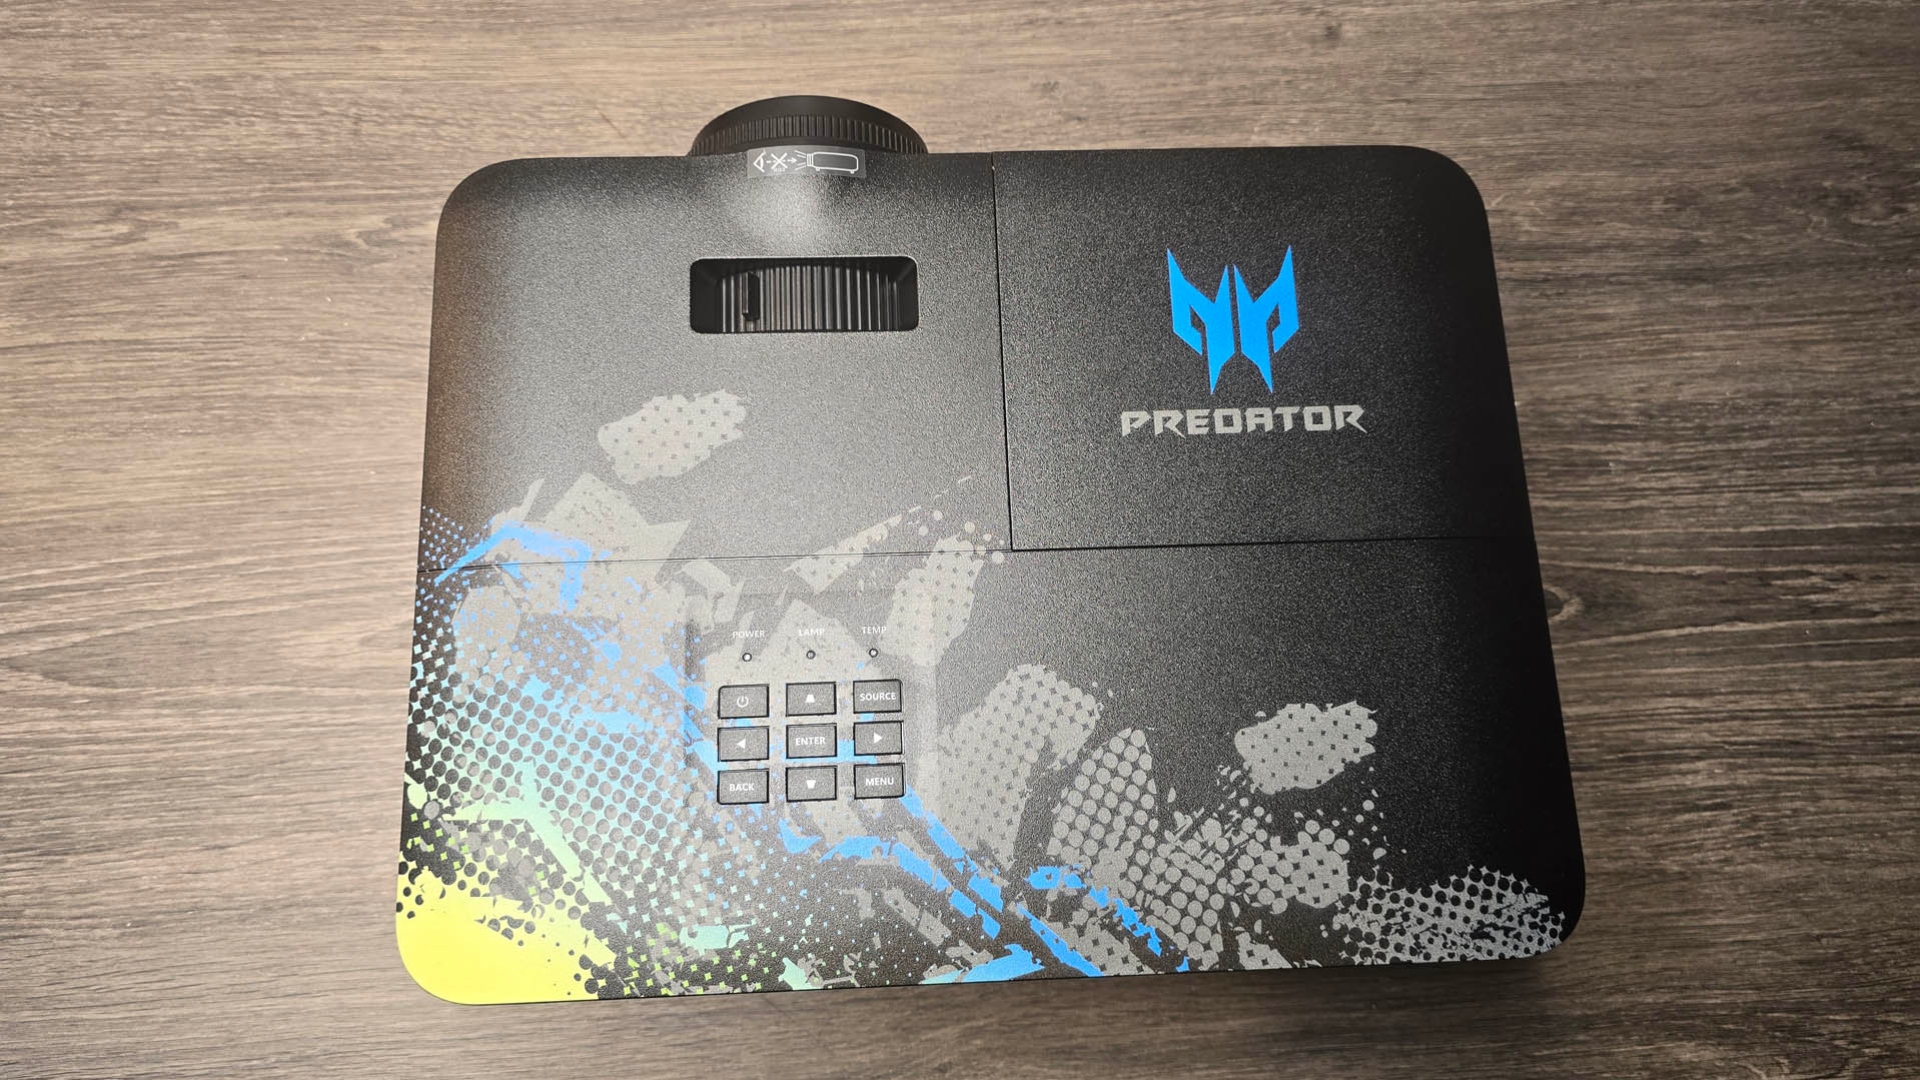 Acer Predator GM712 review image showing the projector from above.